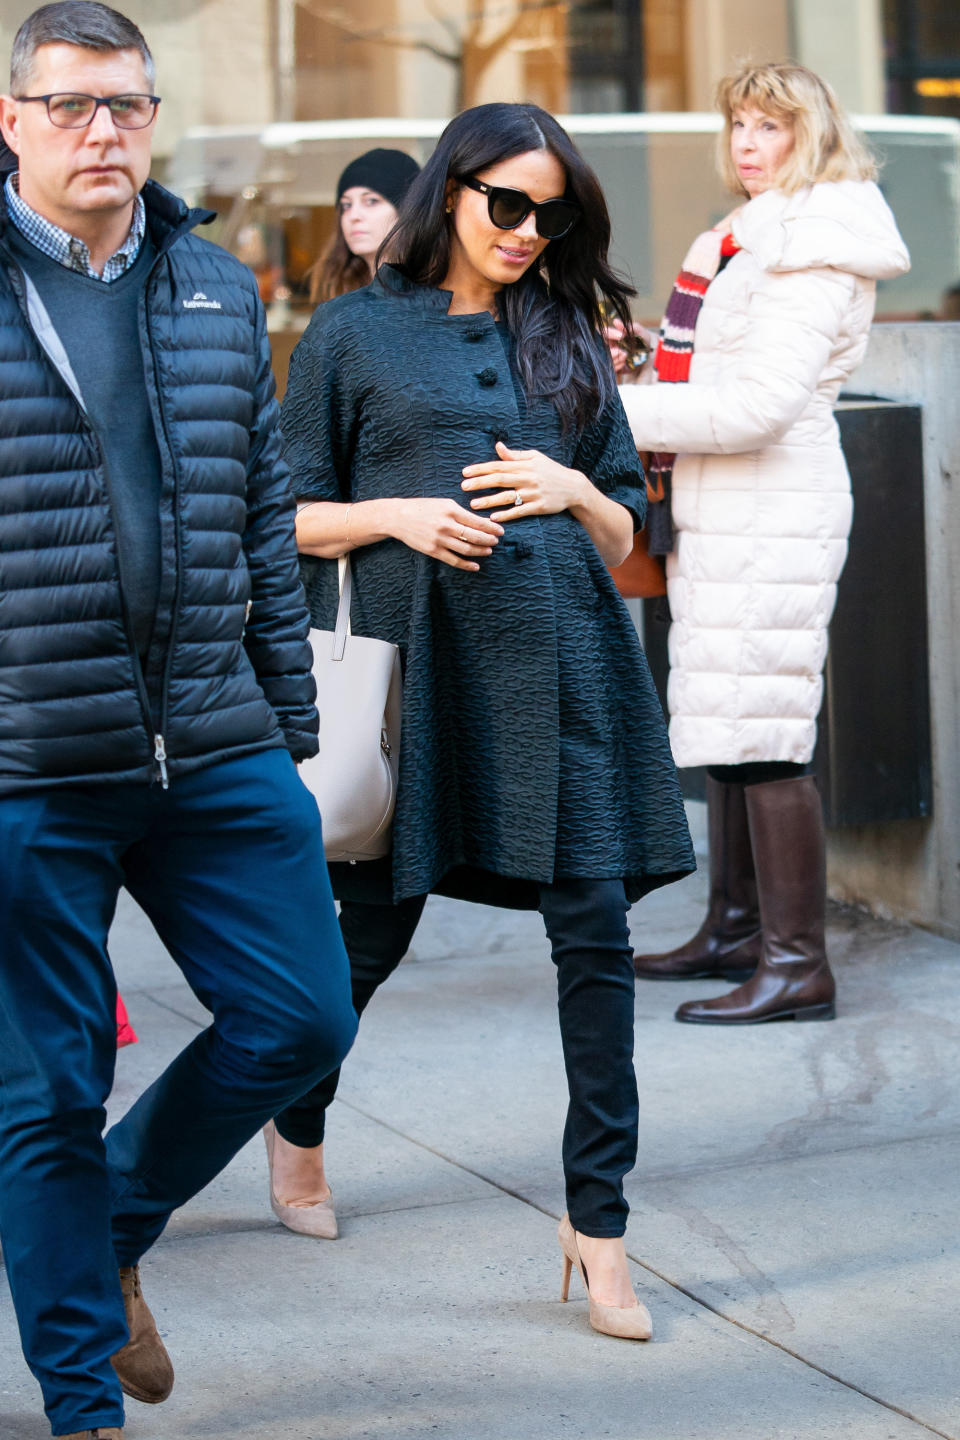 Meghan walking around New York's Upper East Side, accompanied by her security detail.&nbsp; (Photo: Gotham via Getty Images)